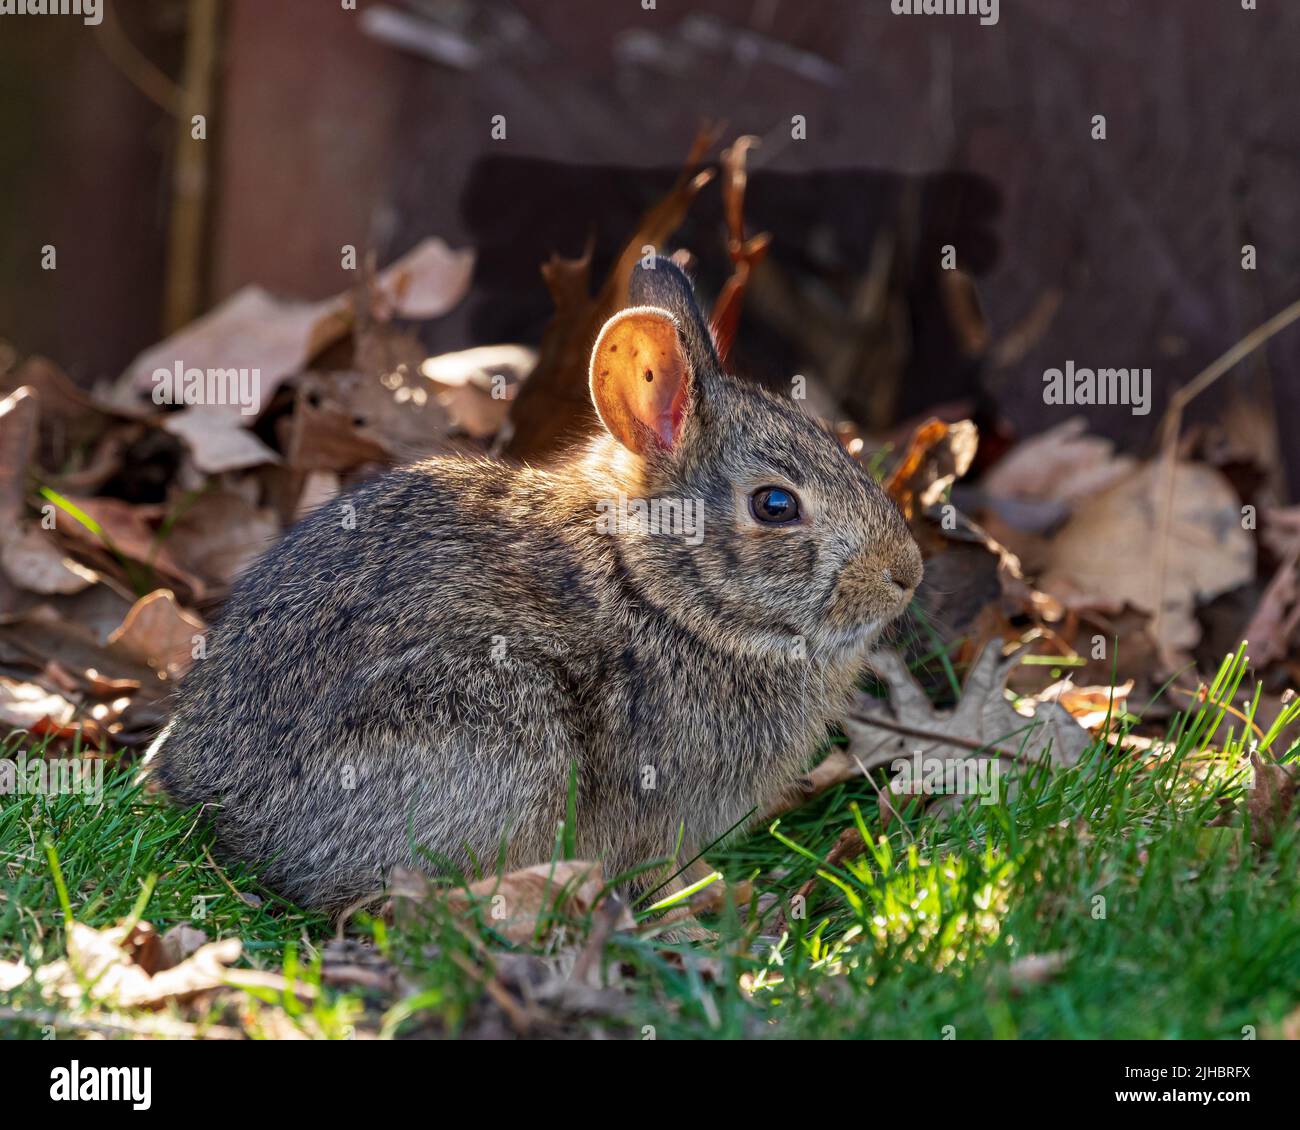 Wild cottontail rabbit with tick inside ear. Wildlife, animals, and habitat conservation concept. Stock Photo